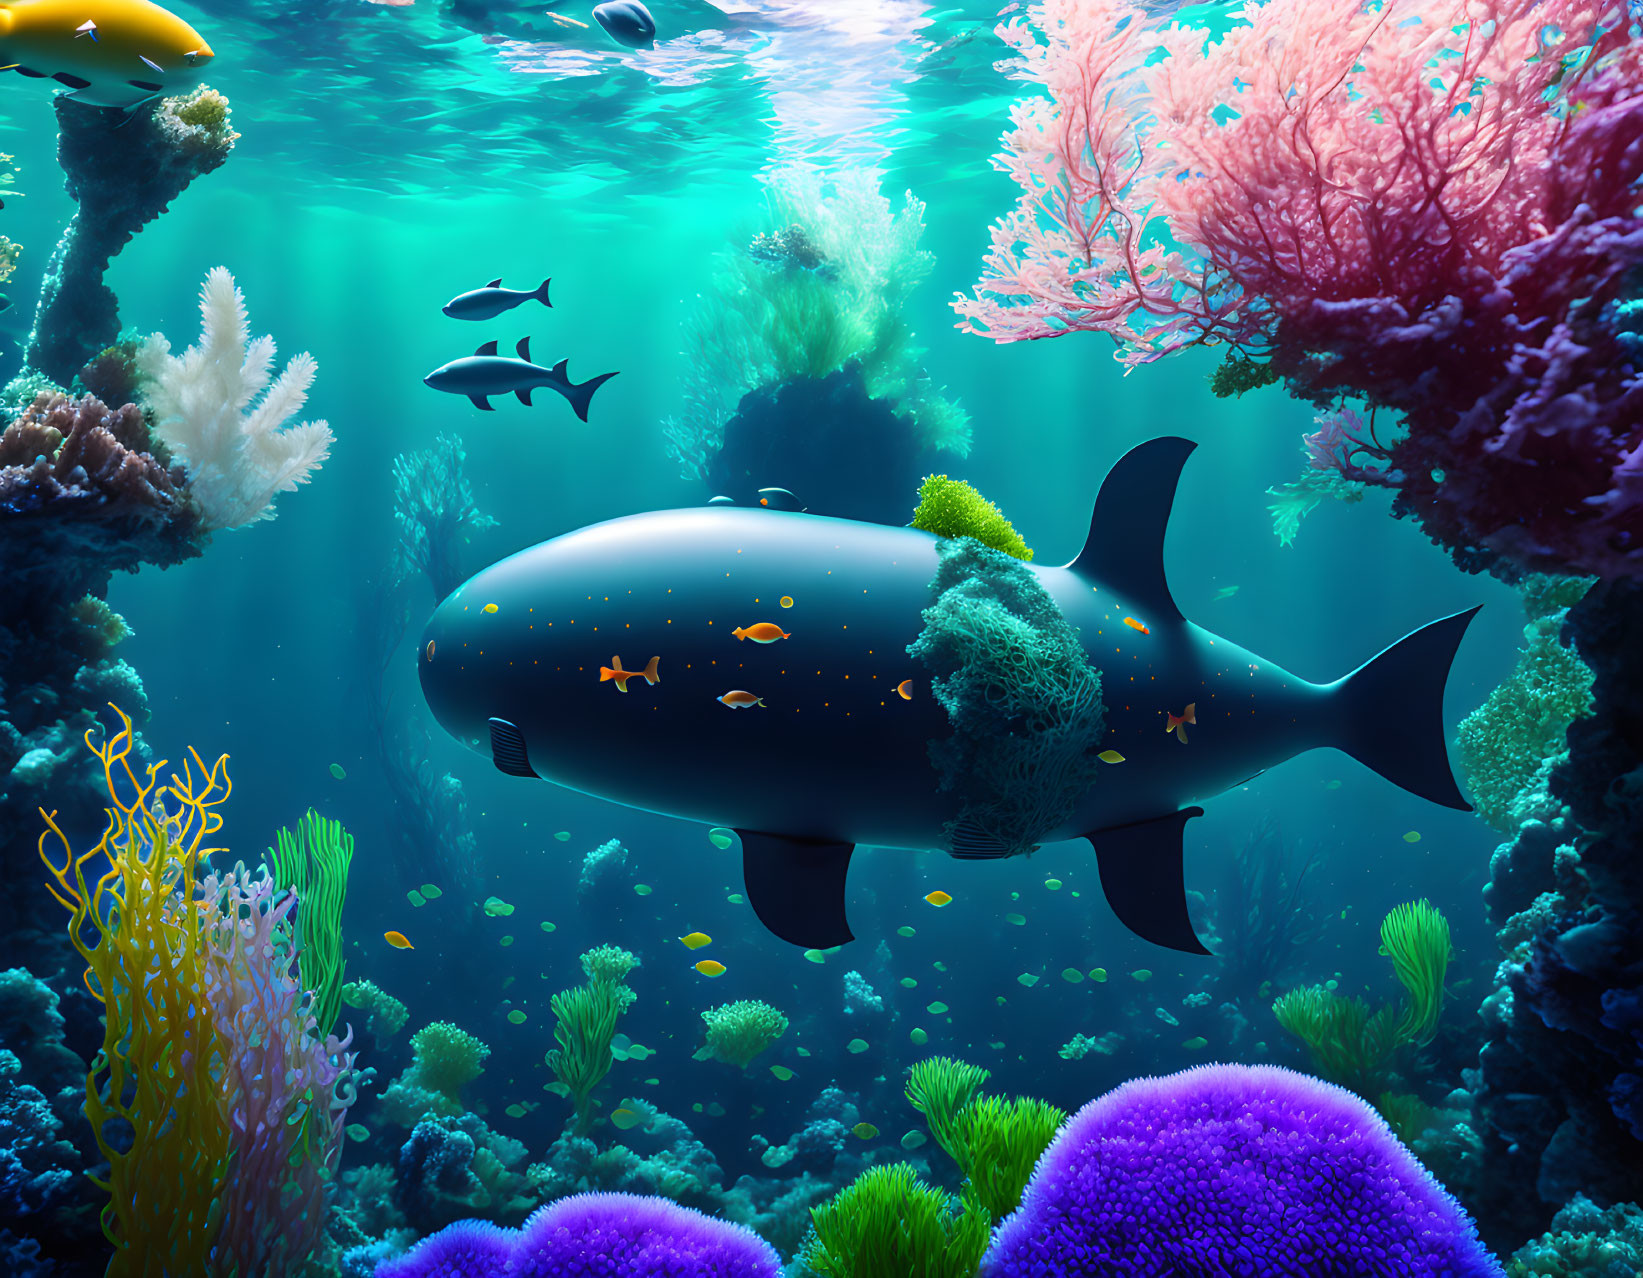 Whale-shaped submarine in vibrant underwater coral scene